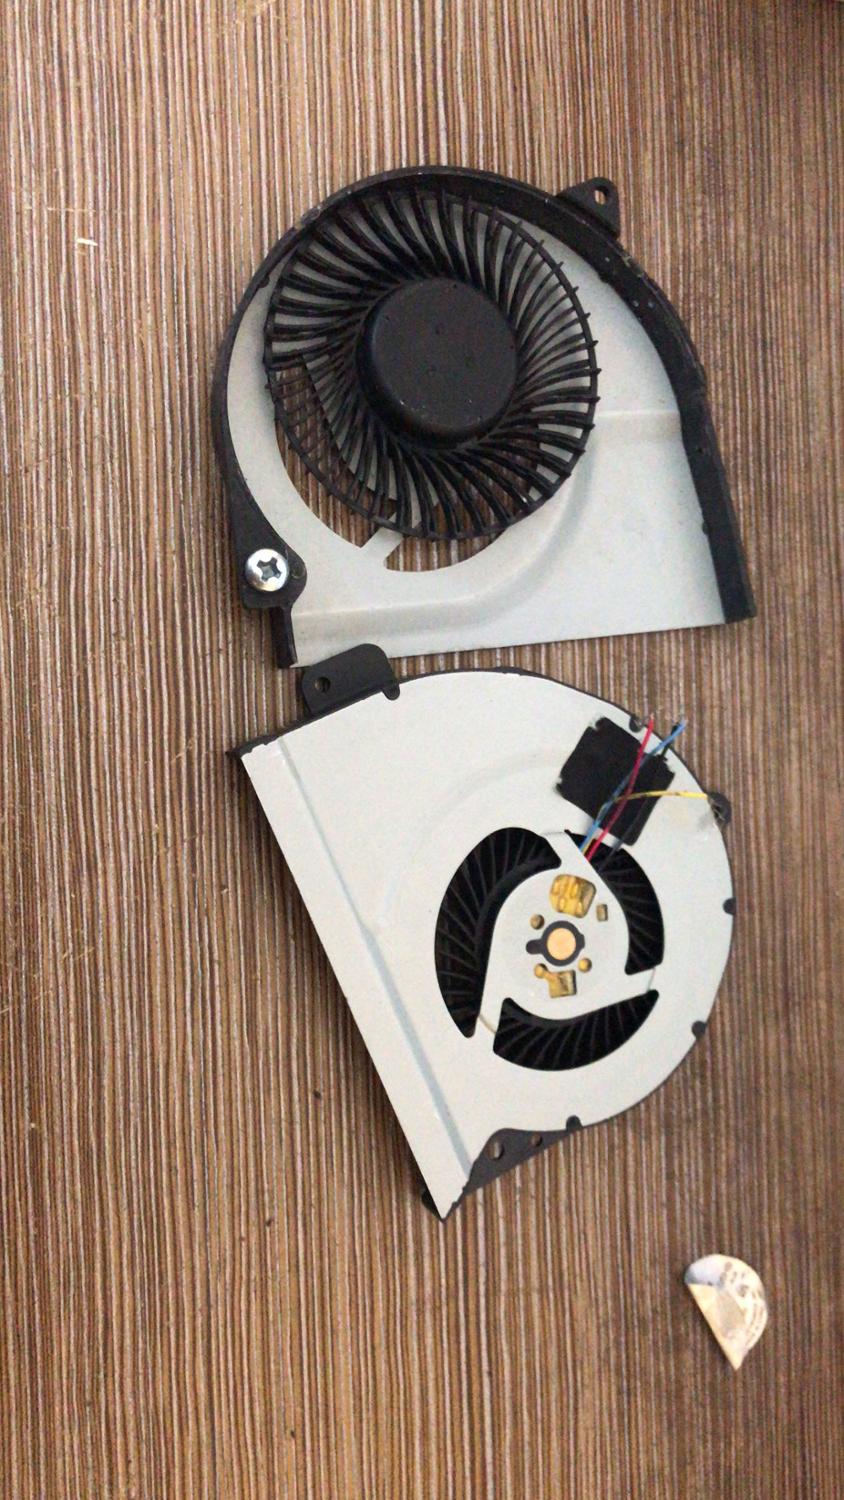 CPU Cooler Fan for Dell Inspiron One 7459 2350 i2350-R168T R158T R108T COOLING FAN MG85100V1-C010-S99 NG7F4 BSB0705HC-CJ2B